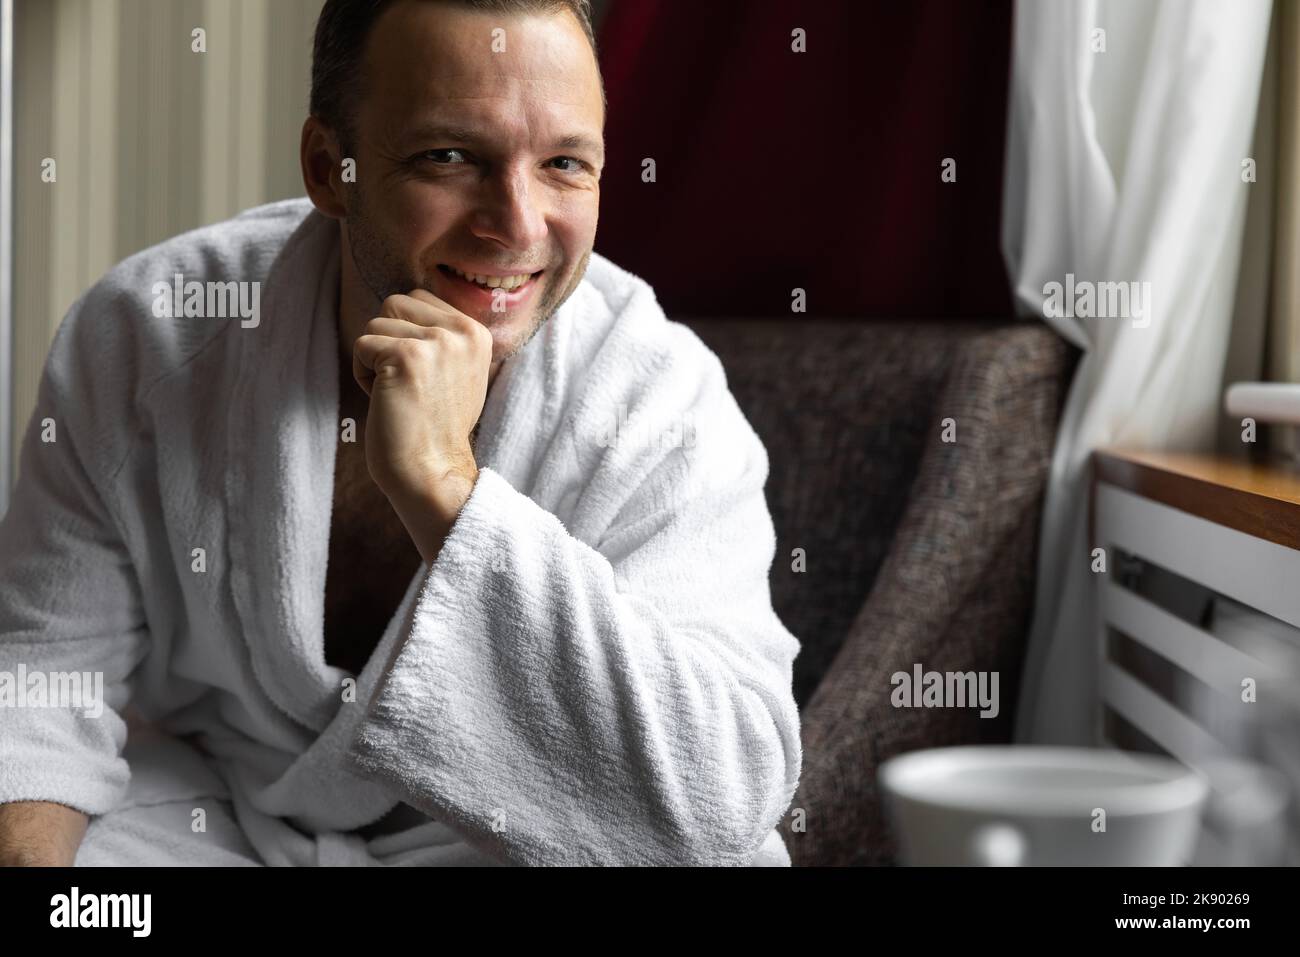 Smiling young adult Caucasian man in white bathrobe is sitting in an armchair Stock Photo